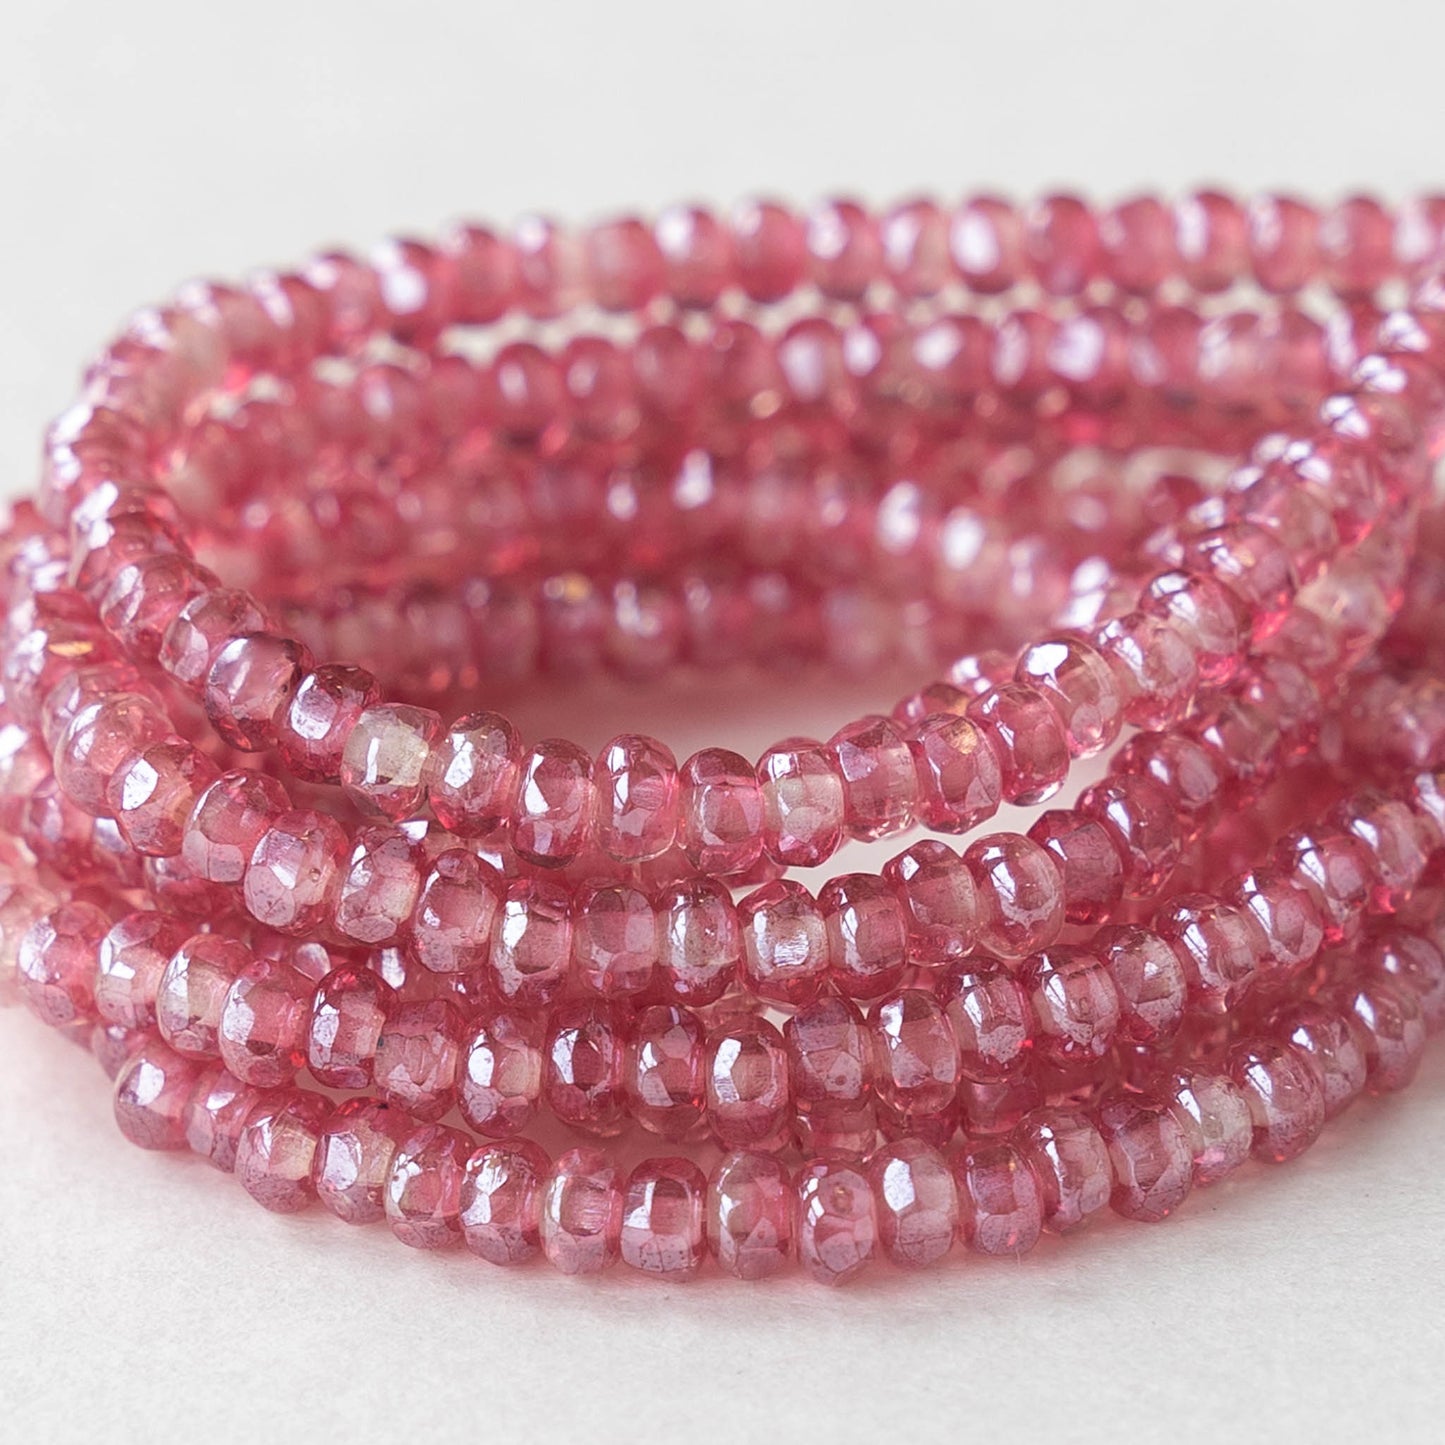 2x3mm Faceted Rondelle Beads - Pink Crystal Mix  - 50 beads